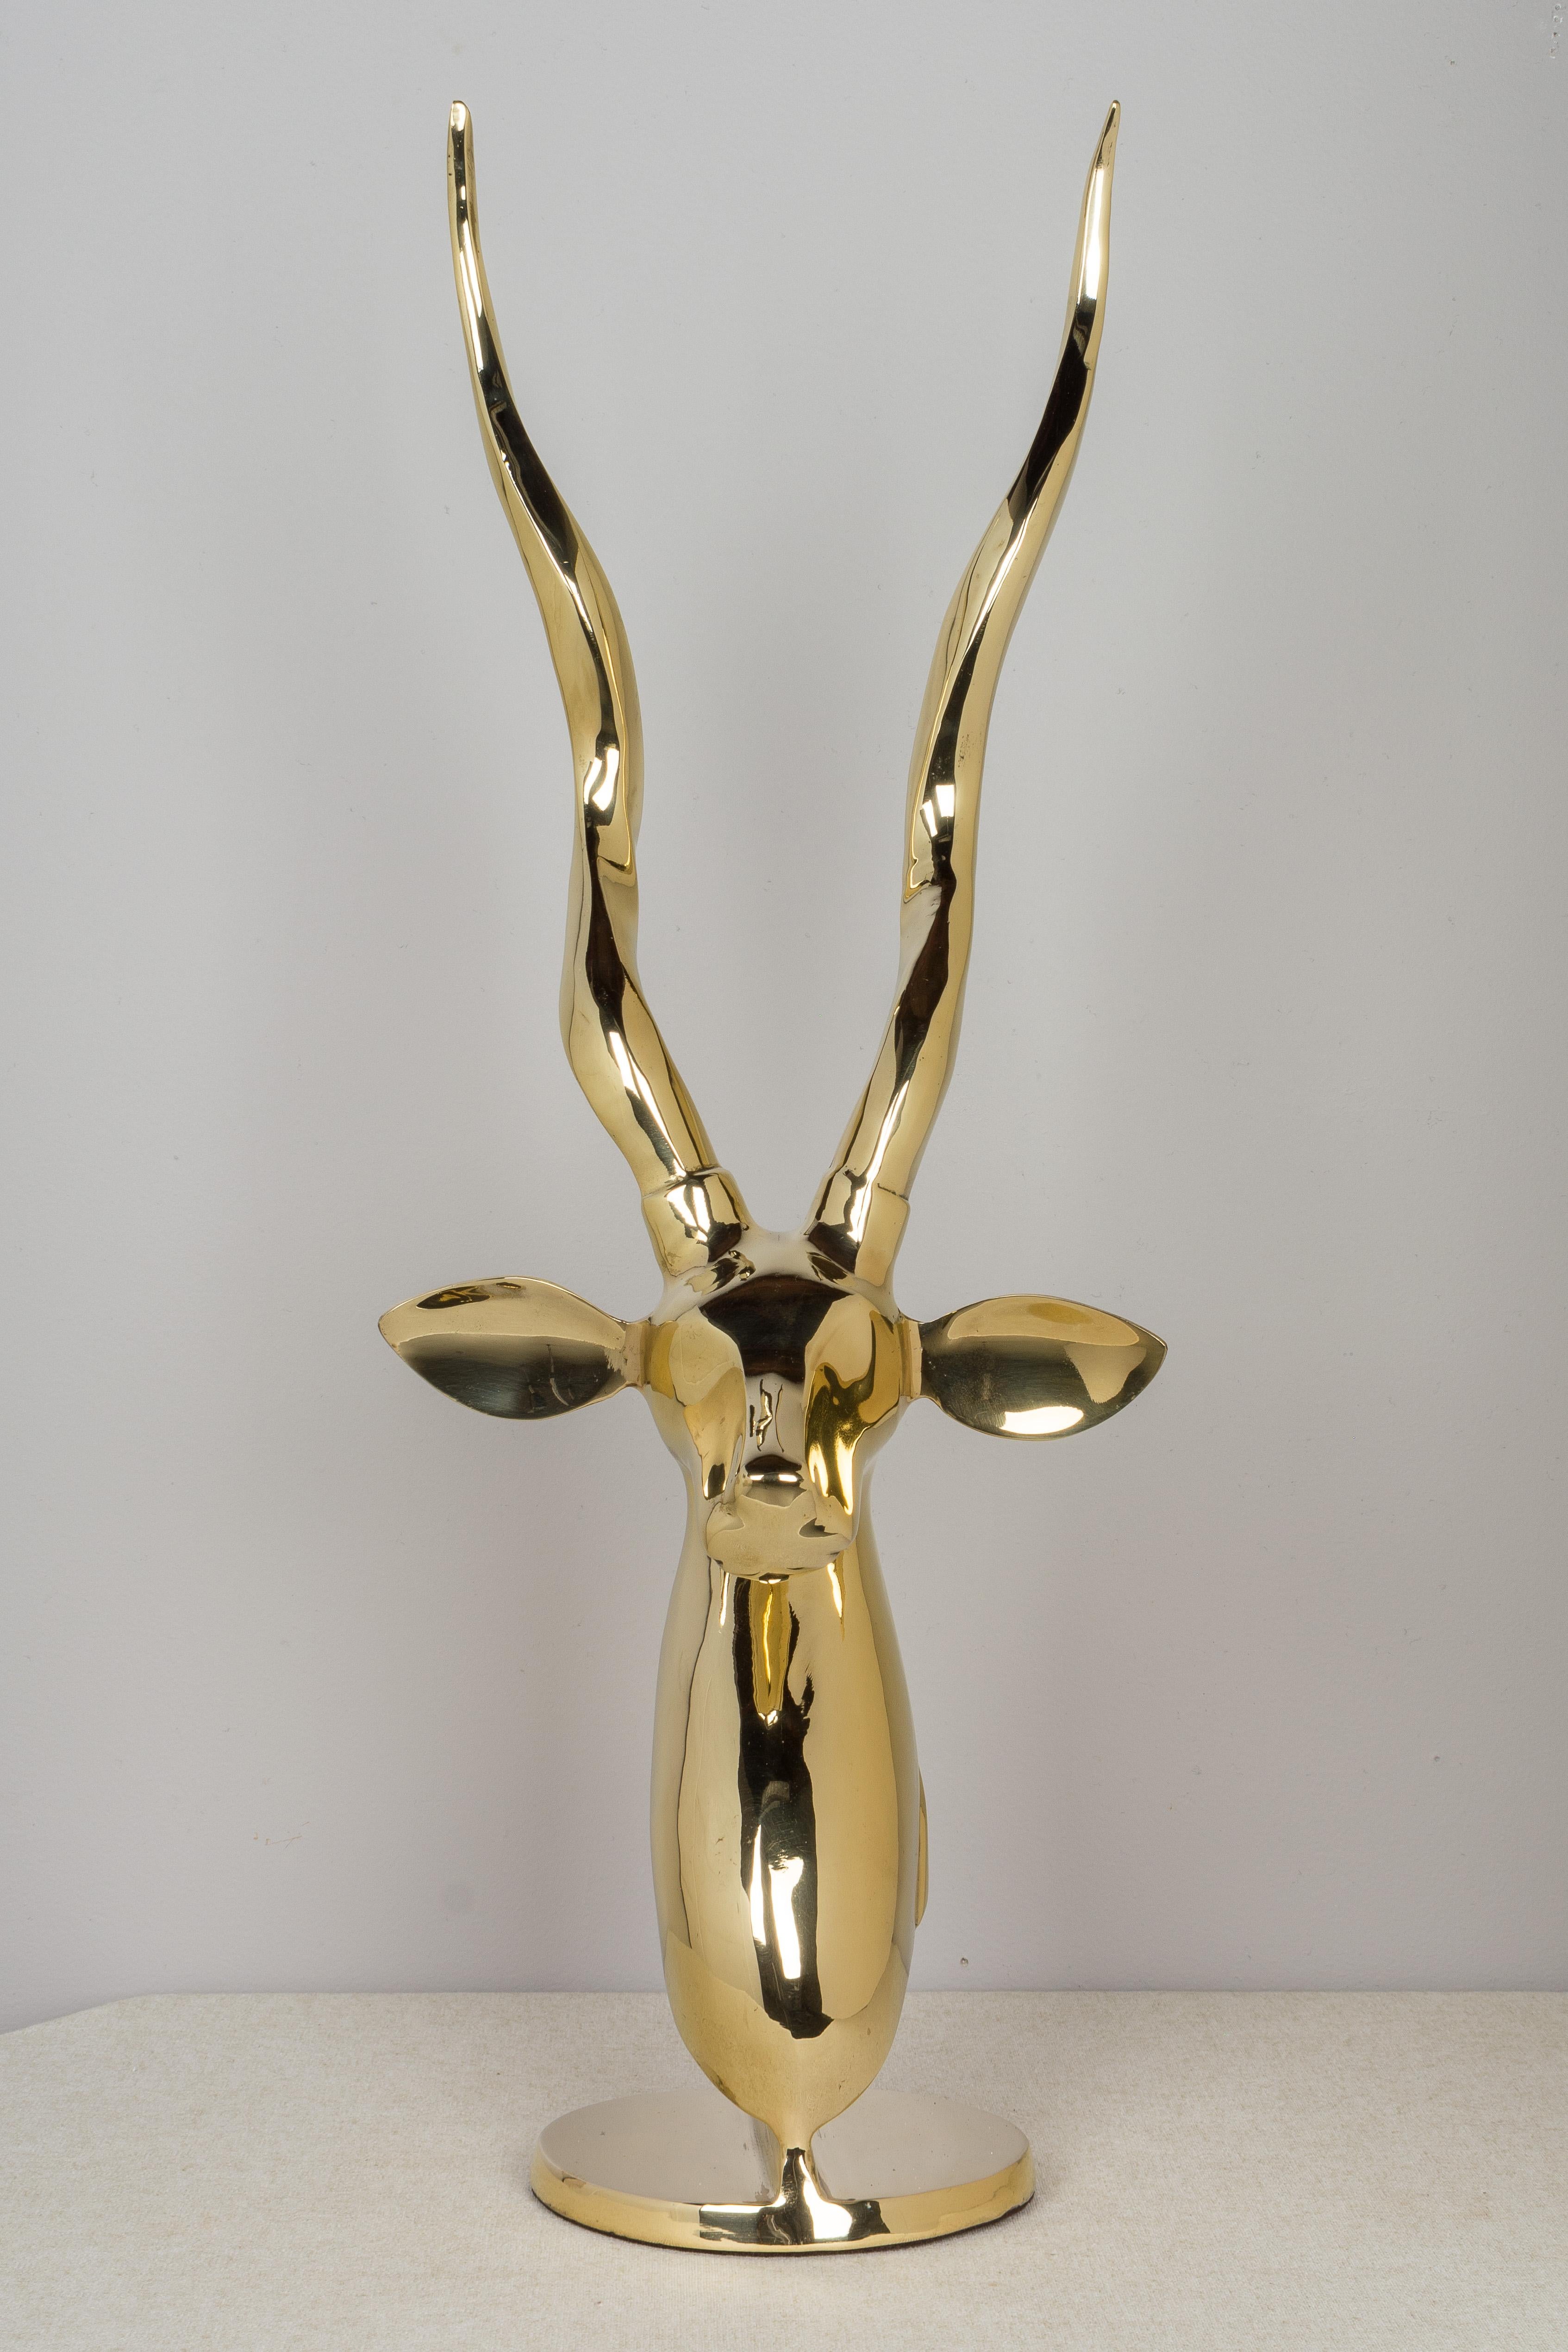 A Mid-Century Modern polished brass sculptural bust of an African Kudo antelope, similar to a gazelle, with tall twisted horns. 
Diameter of base is 6.75